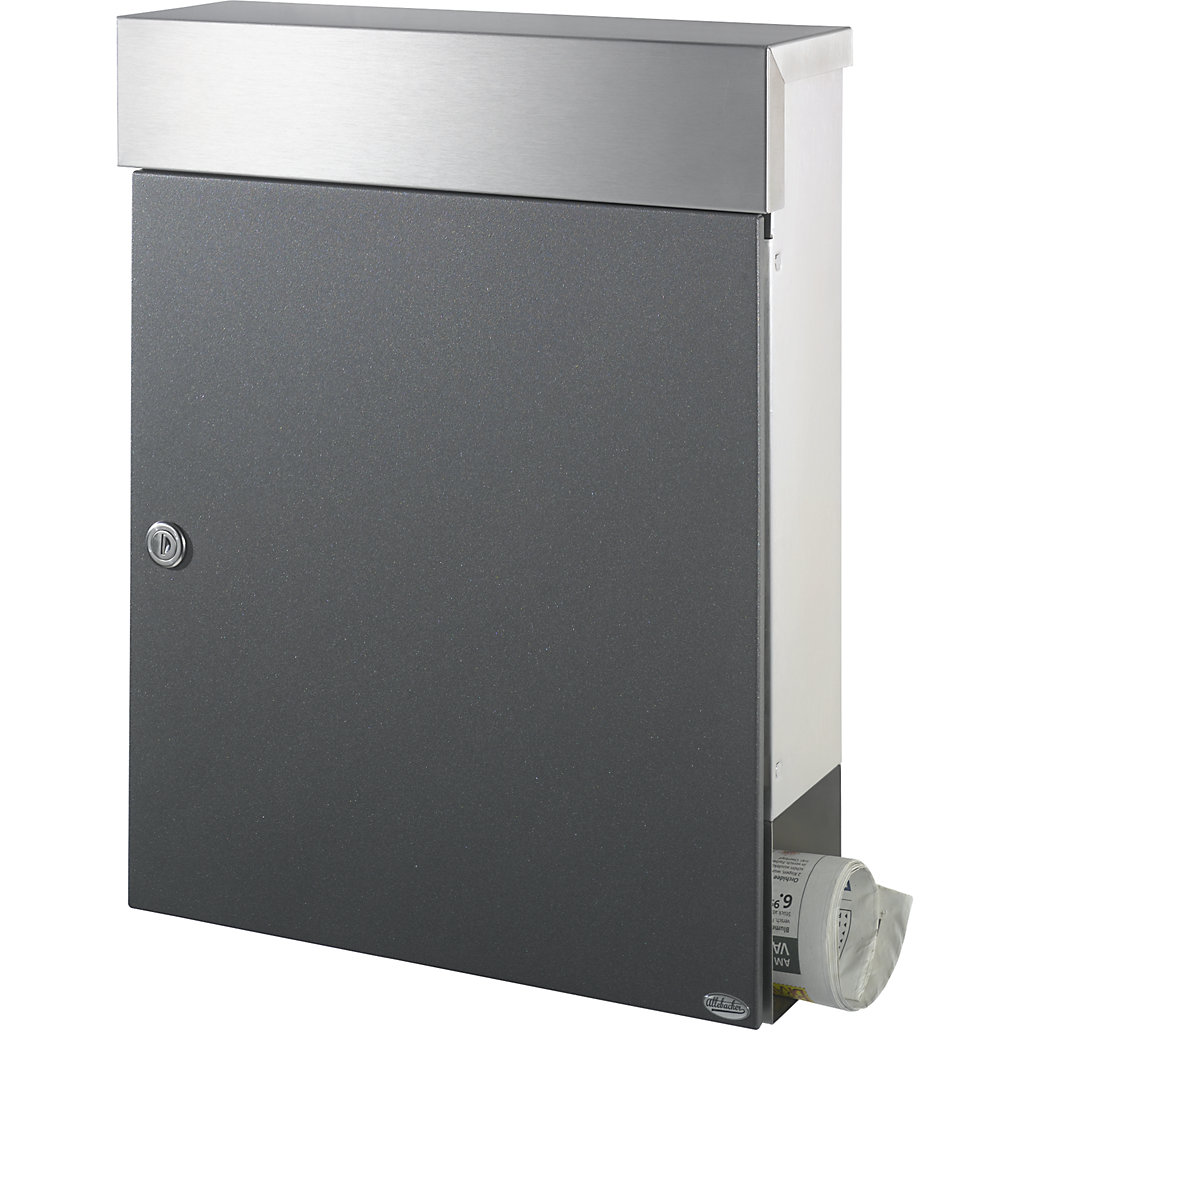 Letter box, with newspaper compartment below, grey aluminium RAL 9007-5